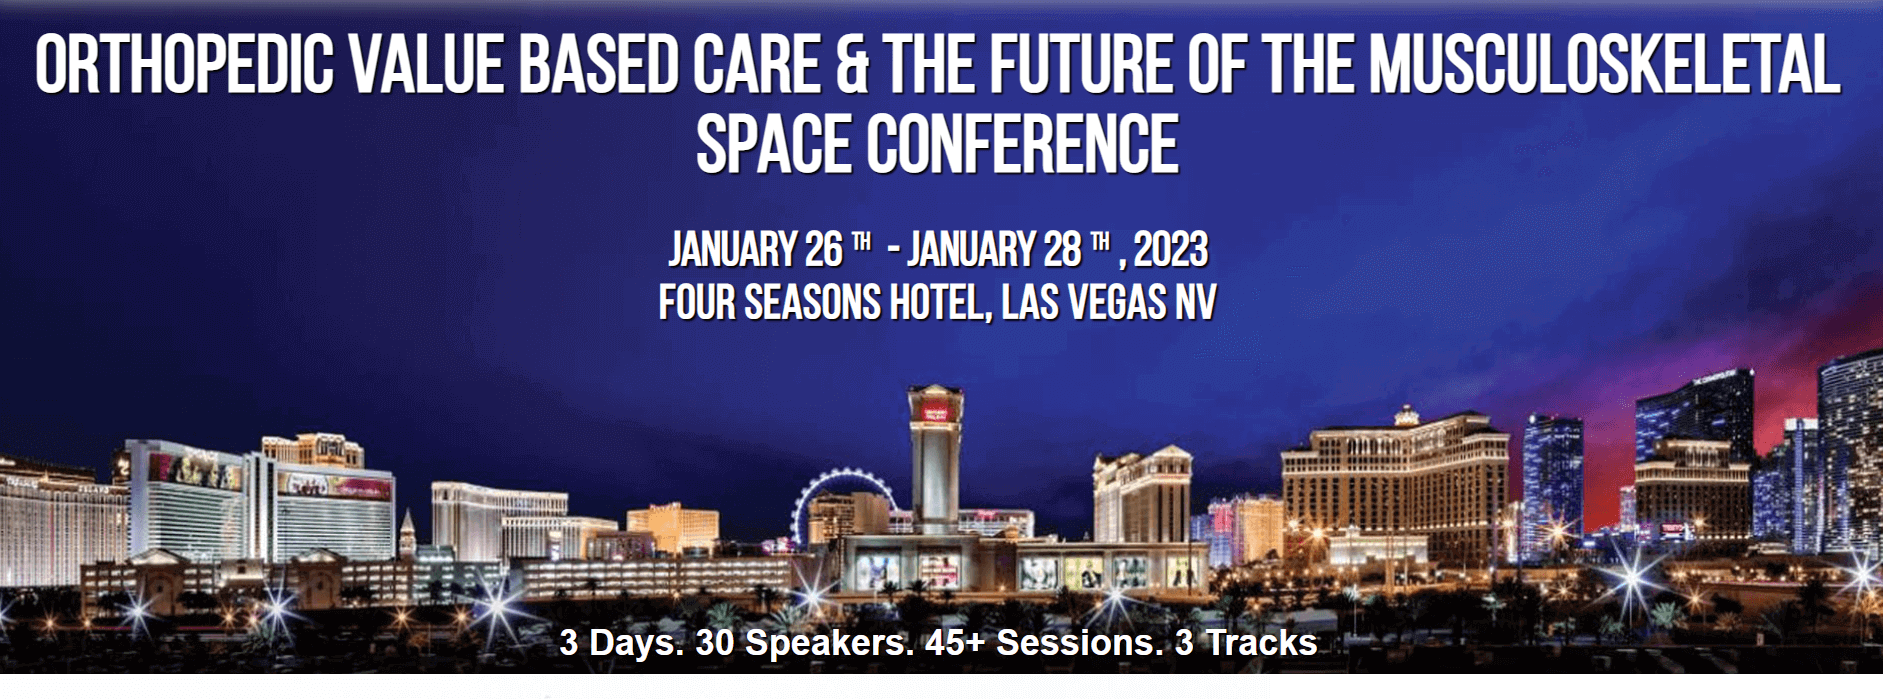 2023 Orthopedic Value Based Care and the Future of   the Musculoskeletal Space Conference